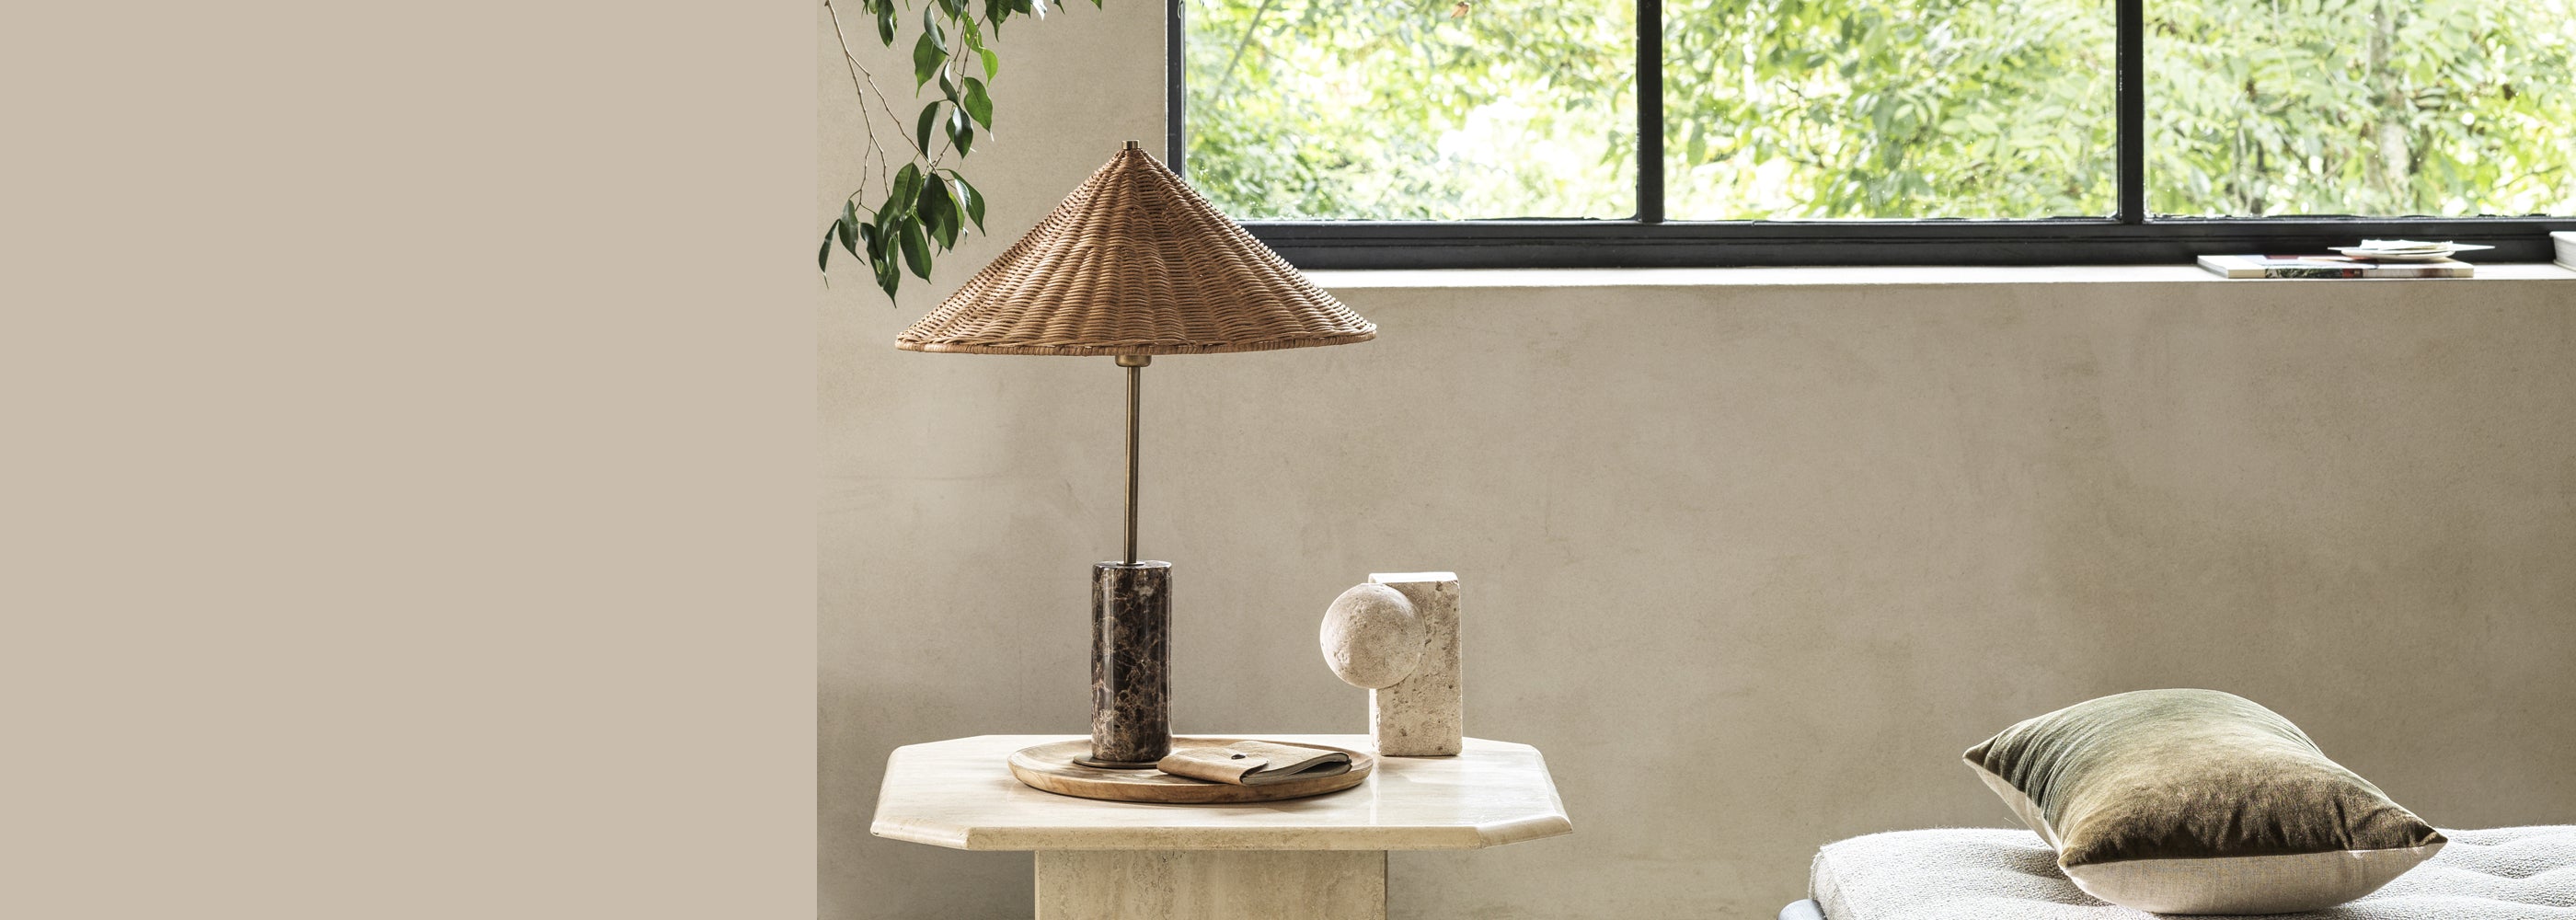 Buy from Lights & Lamps | Lightsandlamps.com - Table Lamps - Free Delivery